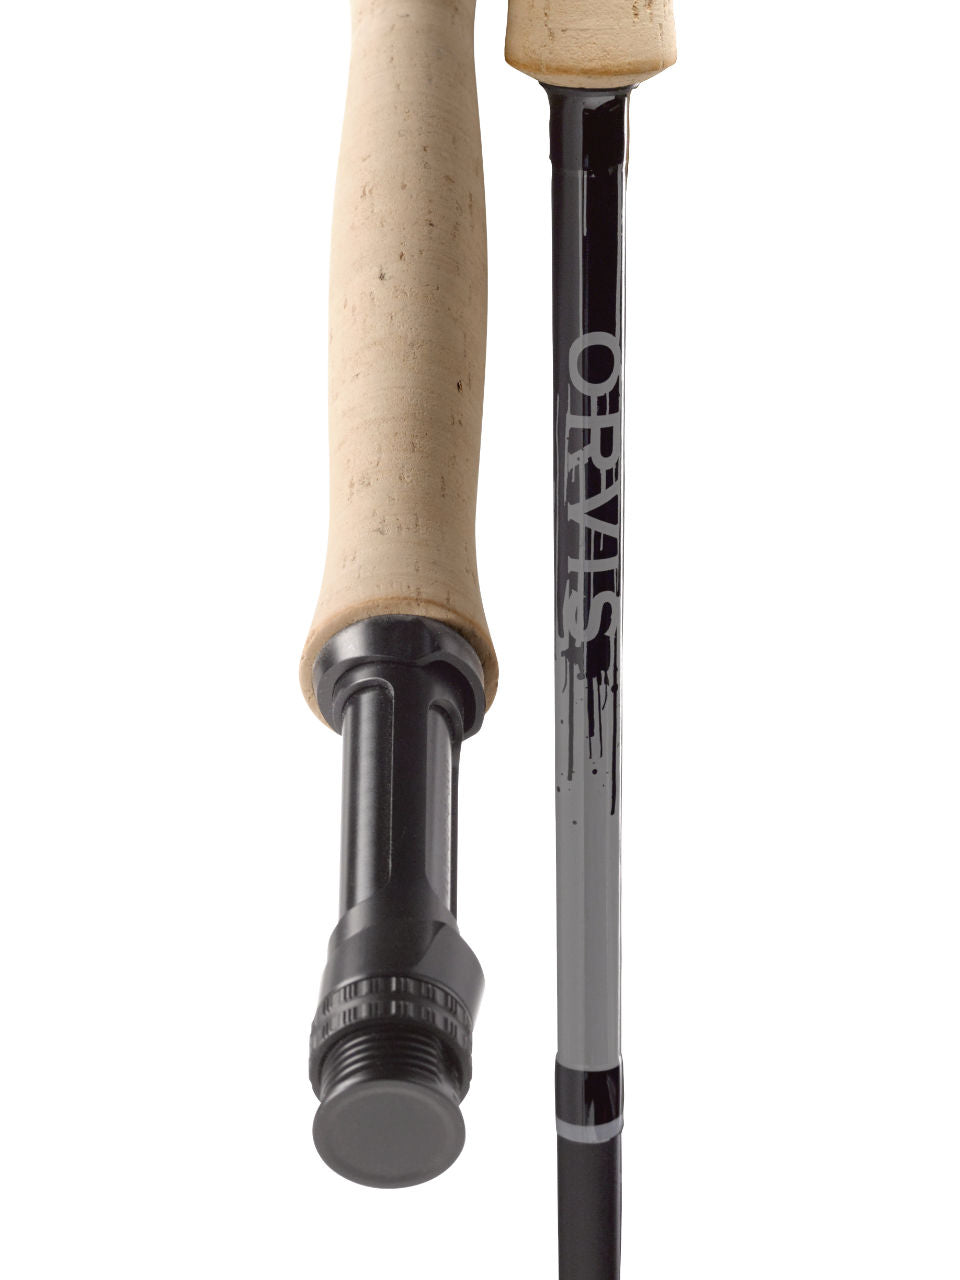 Orvis Helios 3 Blackout - limited